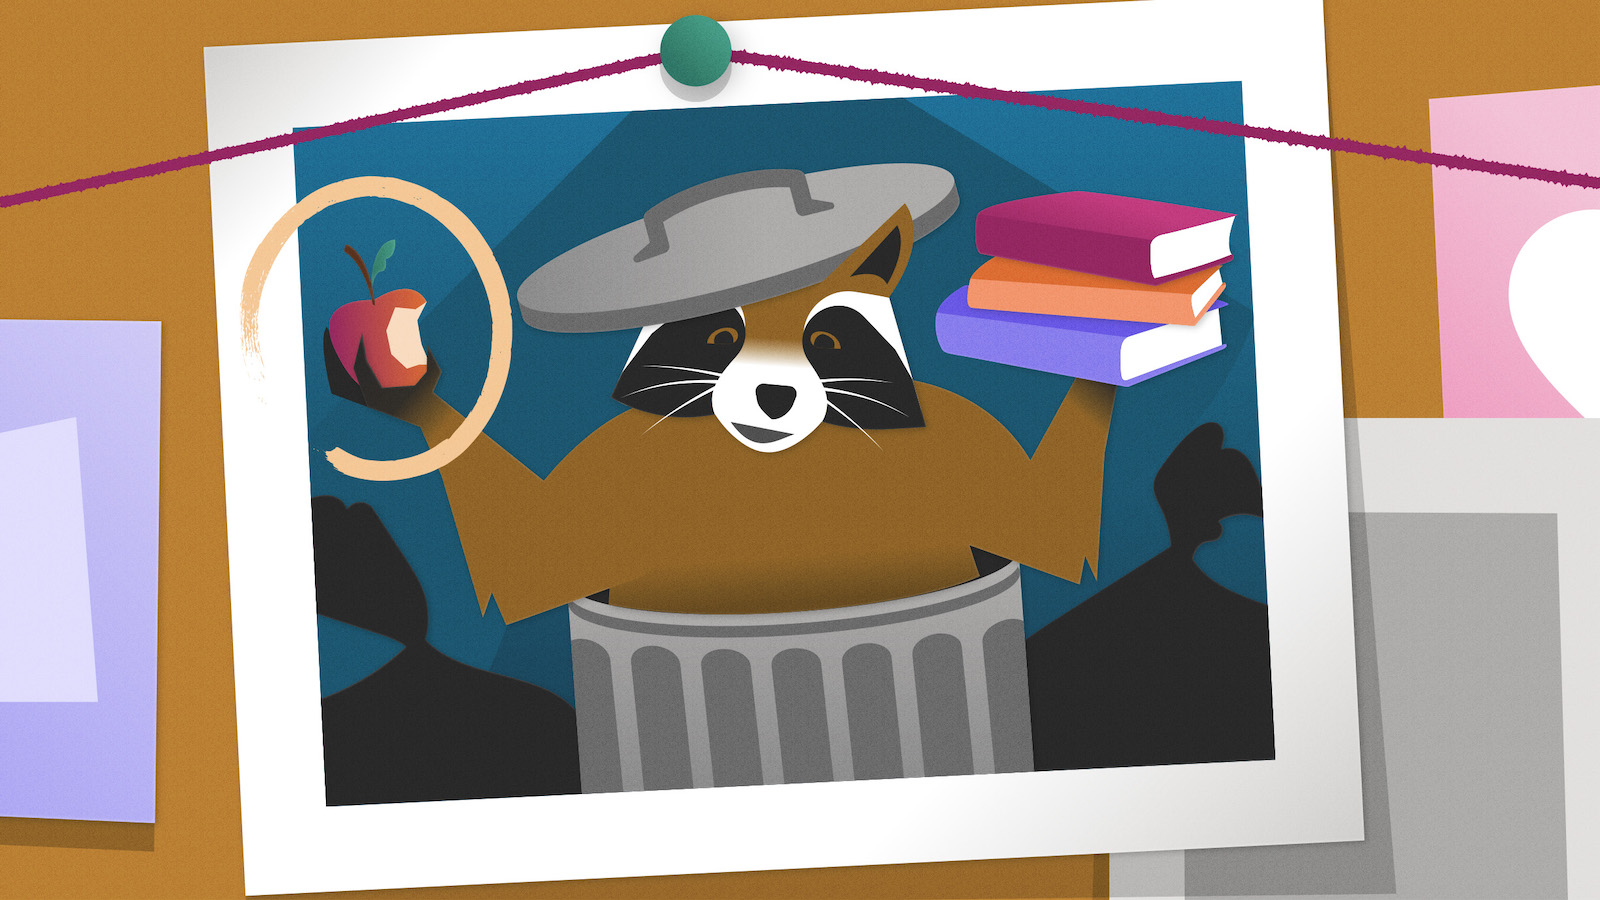 Raccoon representing a UX trash animal doing UX discovery stands in a trash can holding an apple and a pile of books.